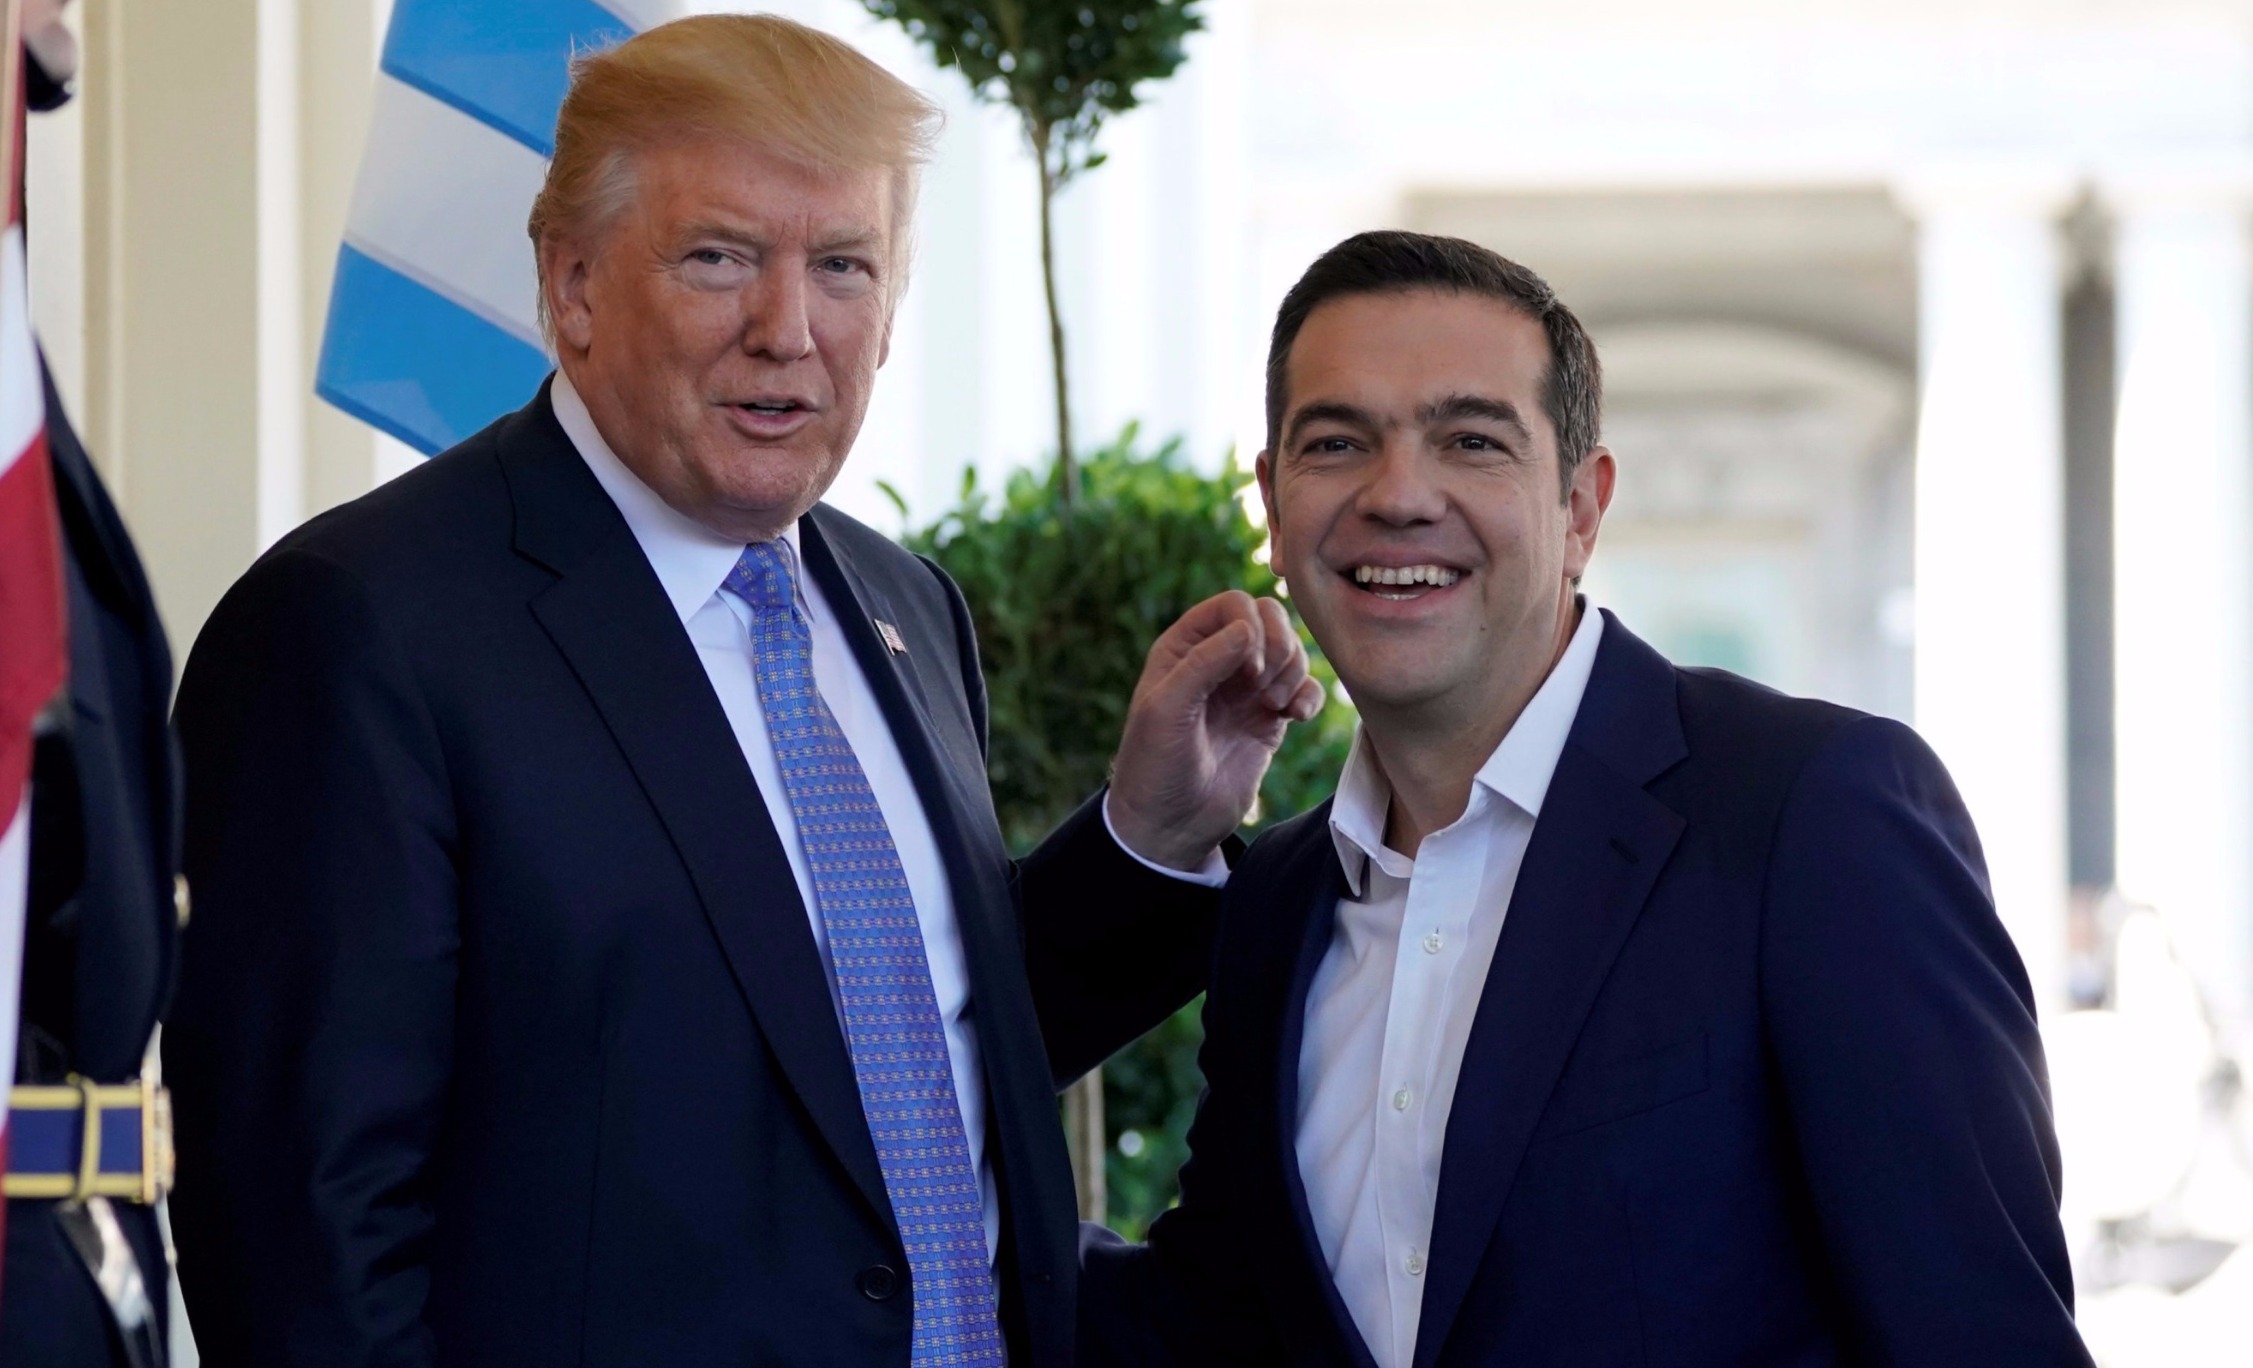 U.S. President Donald Trump greets Greek Prime Minister Alexis Tsipras as he arrives at the White House in Washington, U.S., Oct. 17, 2017.